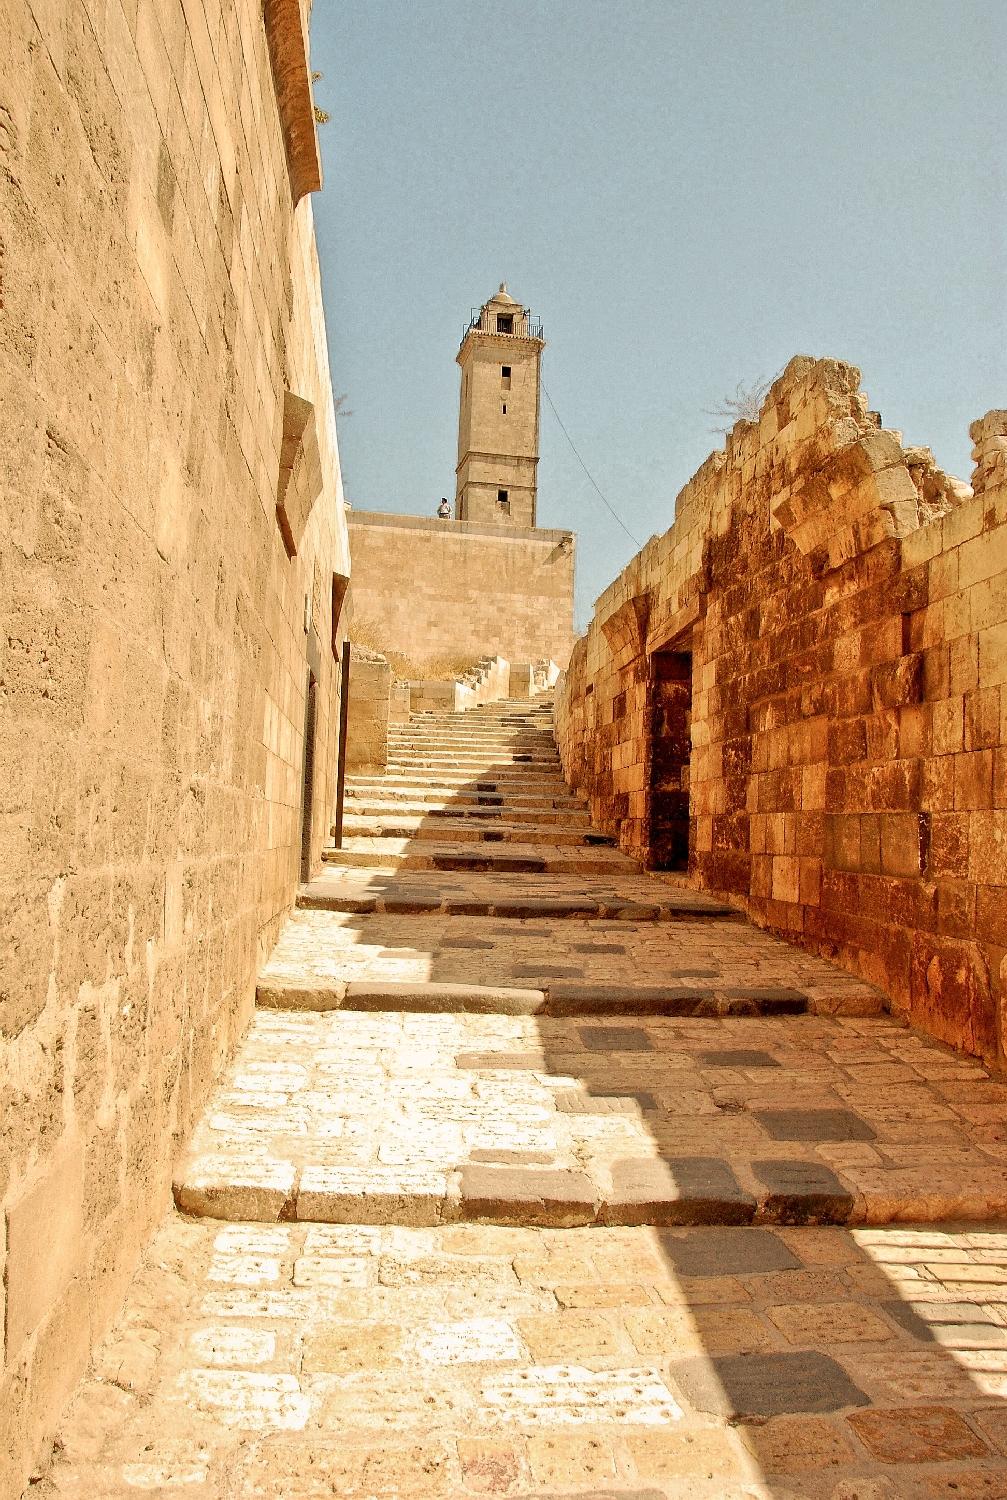 One of the main causeways in the citadel, leading to the Great Mosque.  One of its square minarets is visible in the background.